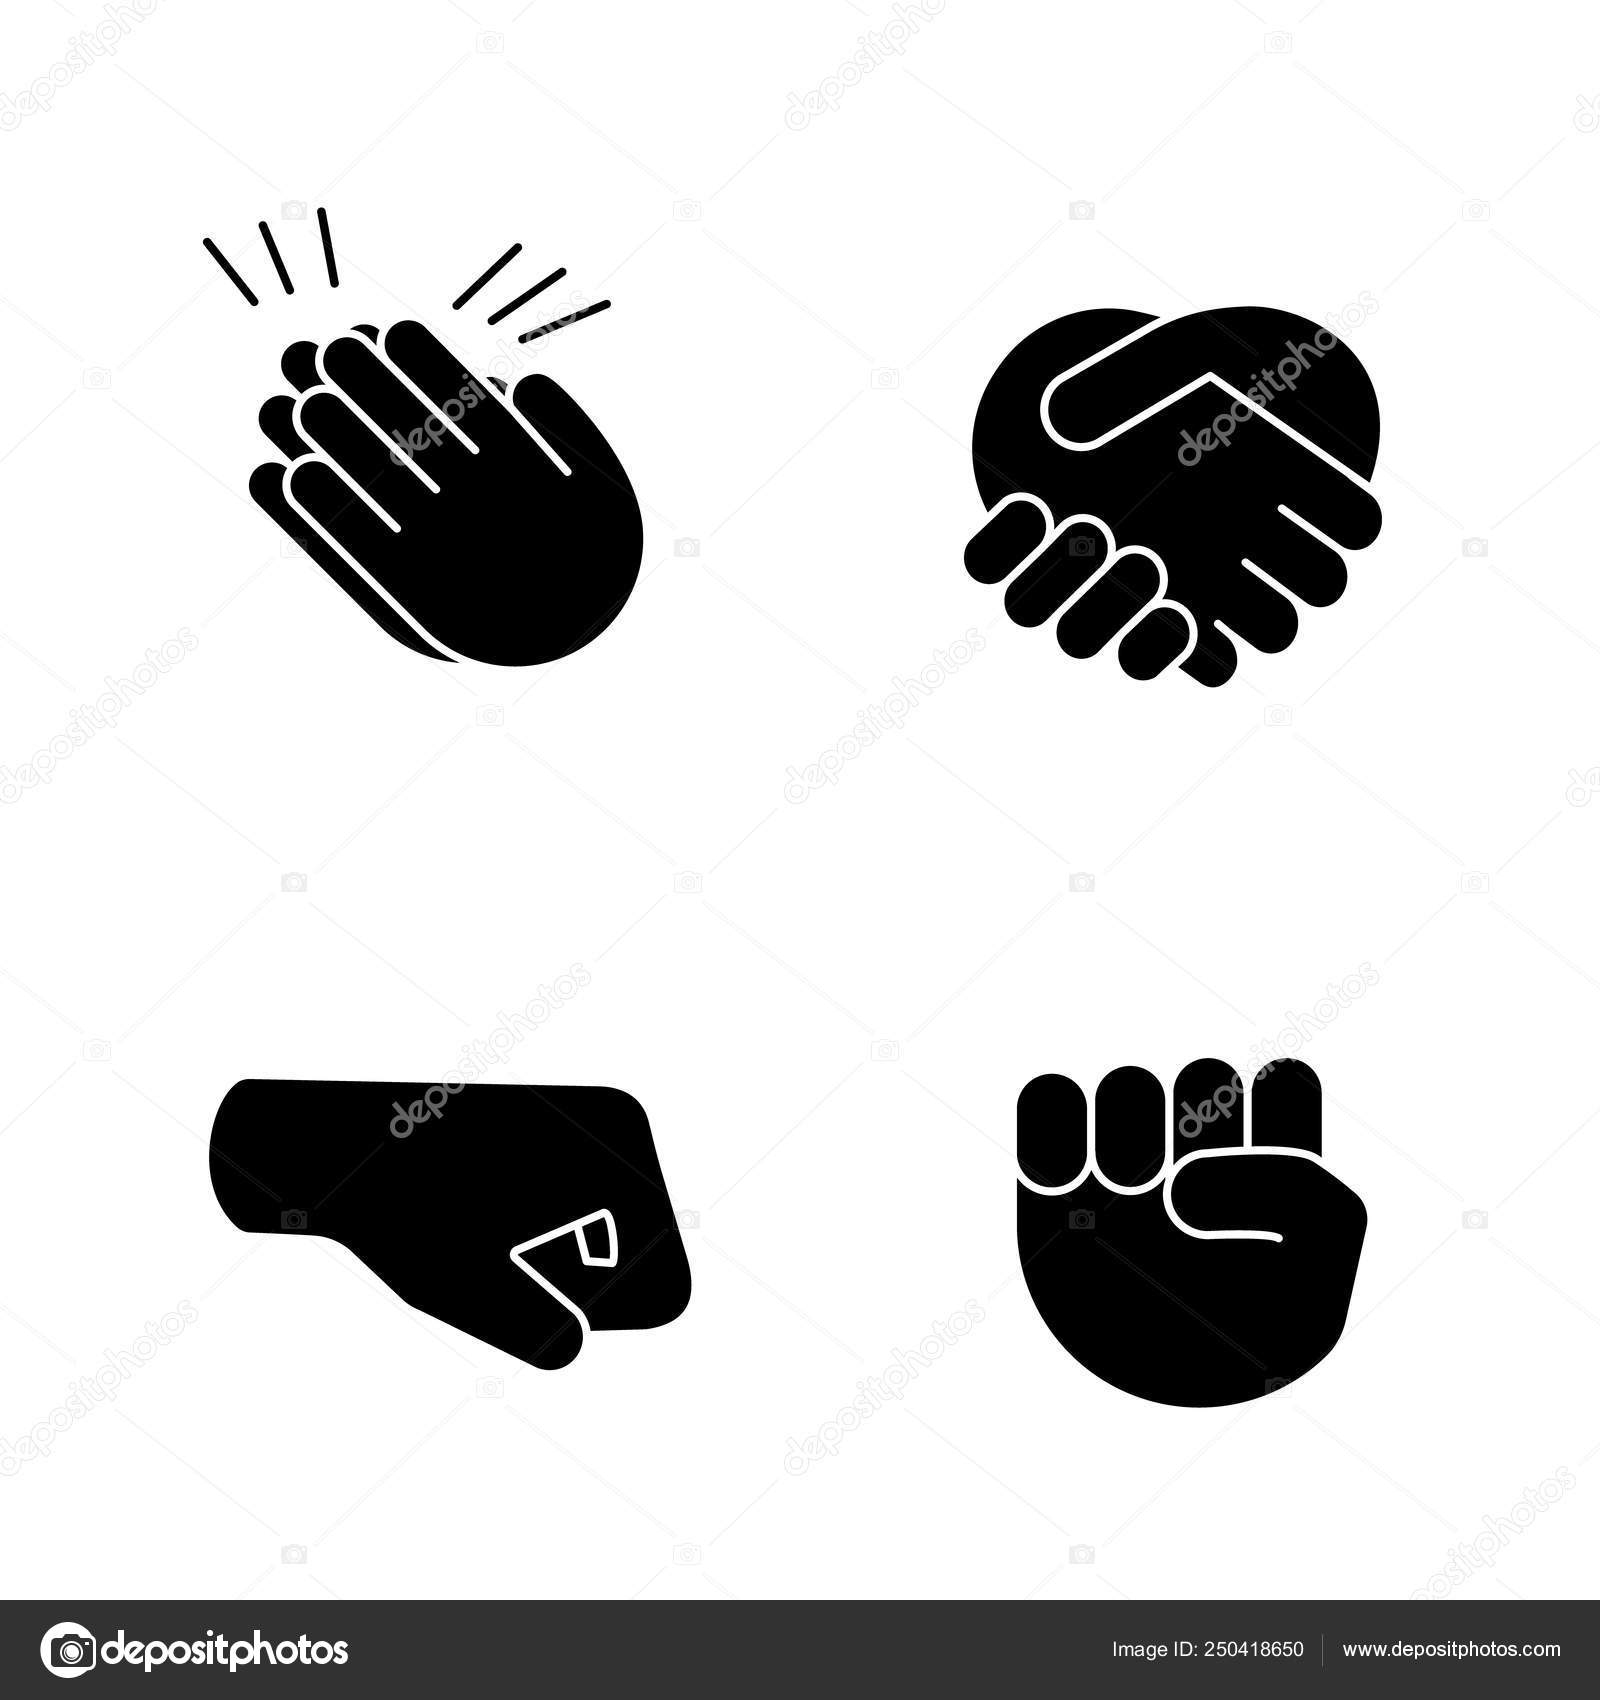 Emoji Ok, Handshake, Holding Hands, Drawing, Clapping, Applause